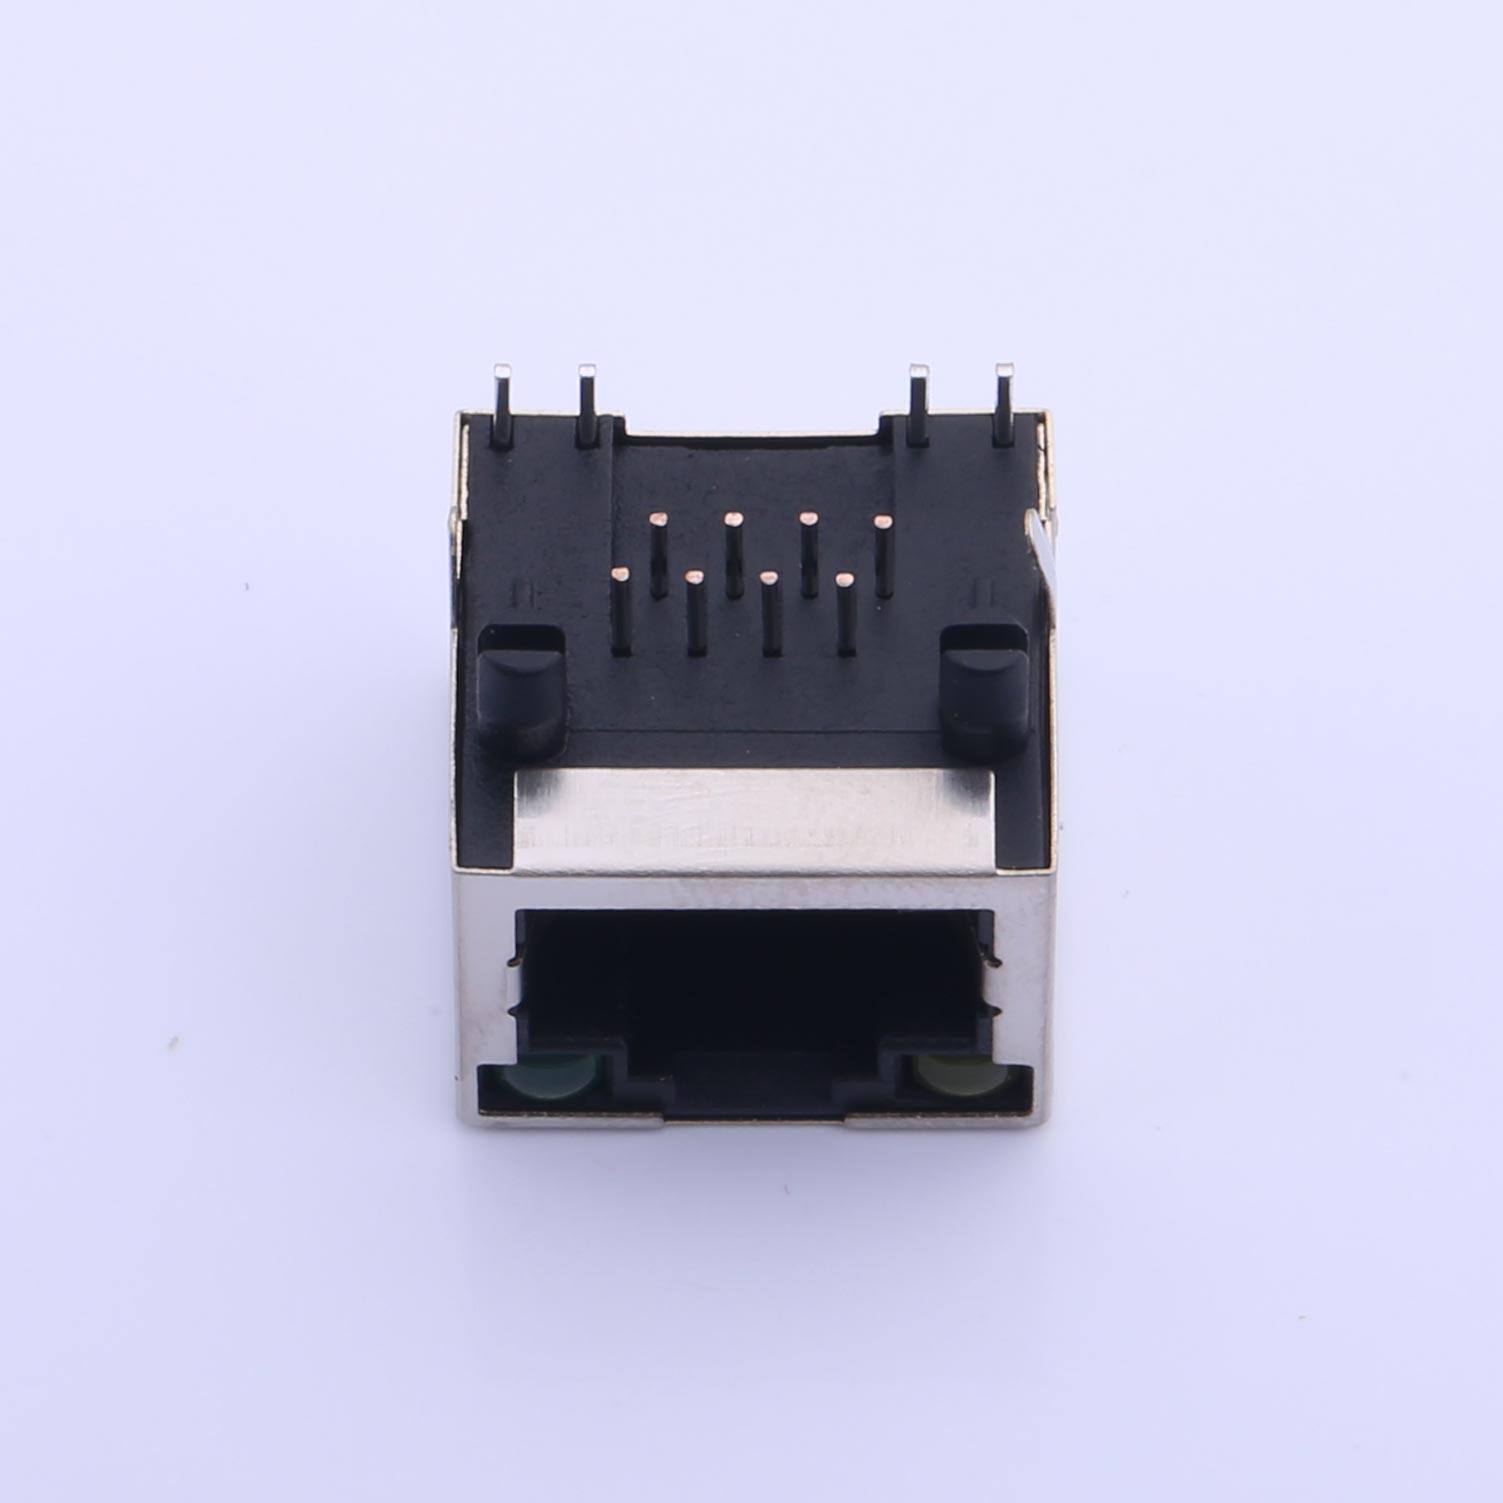 Kinghelm Network interface 8P8C RJ45 1x1 single port female Ethernet connector with LED indicator